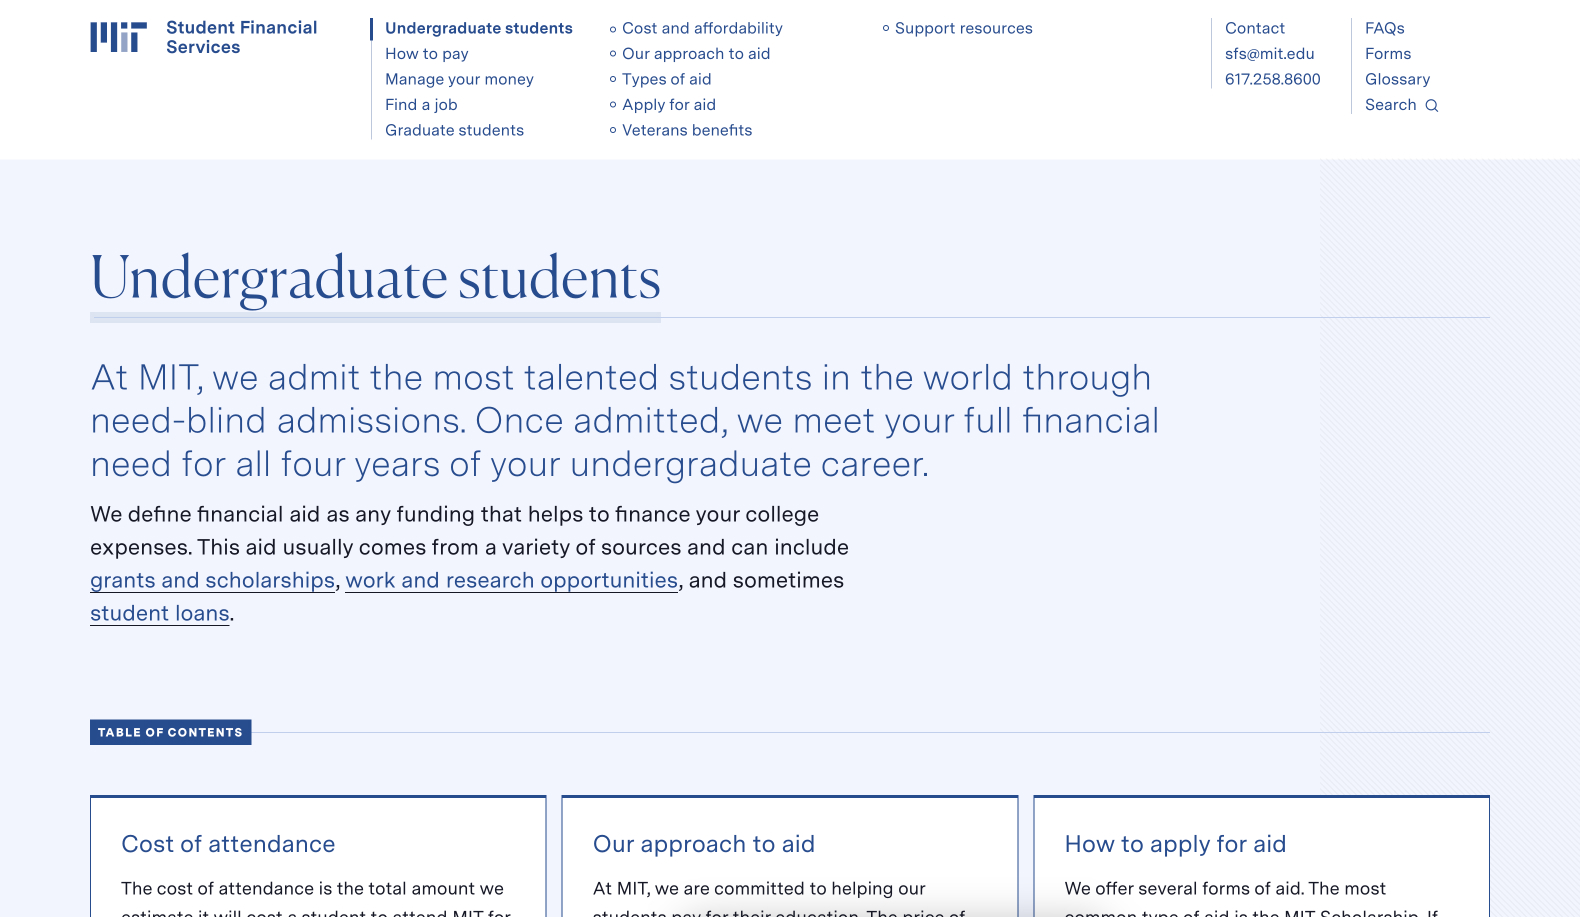 Screenshot from MIT Student Financial Services homepage